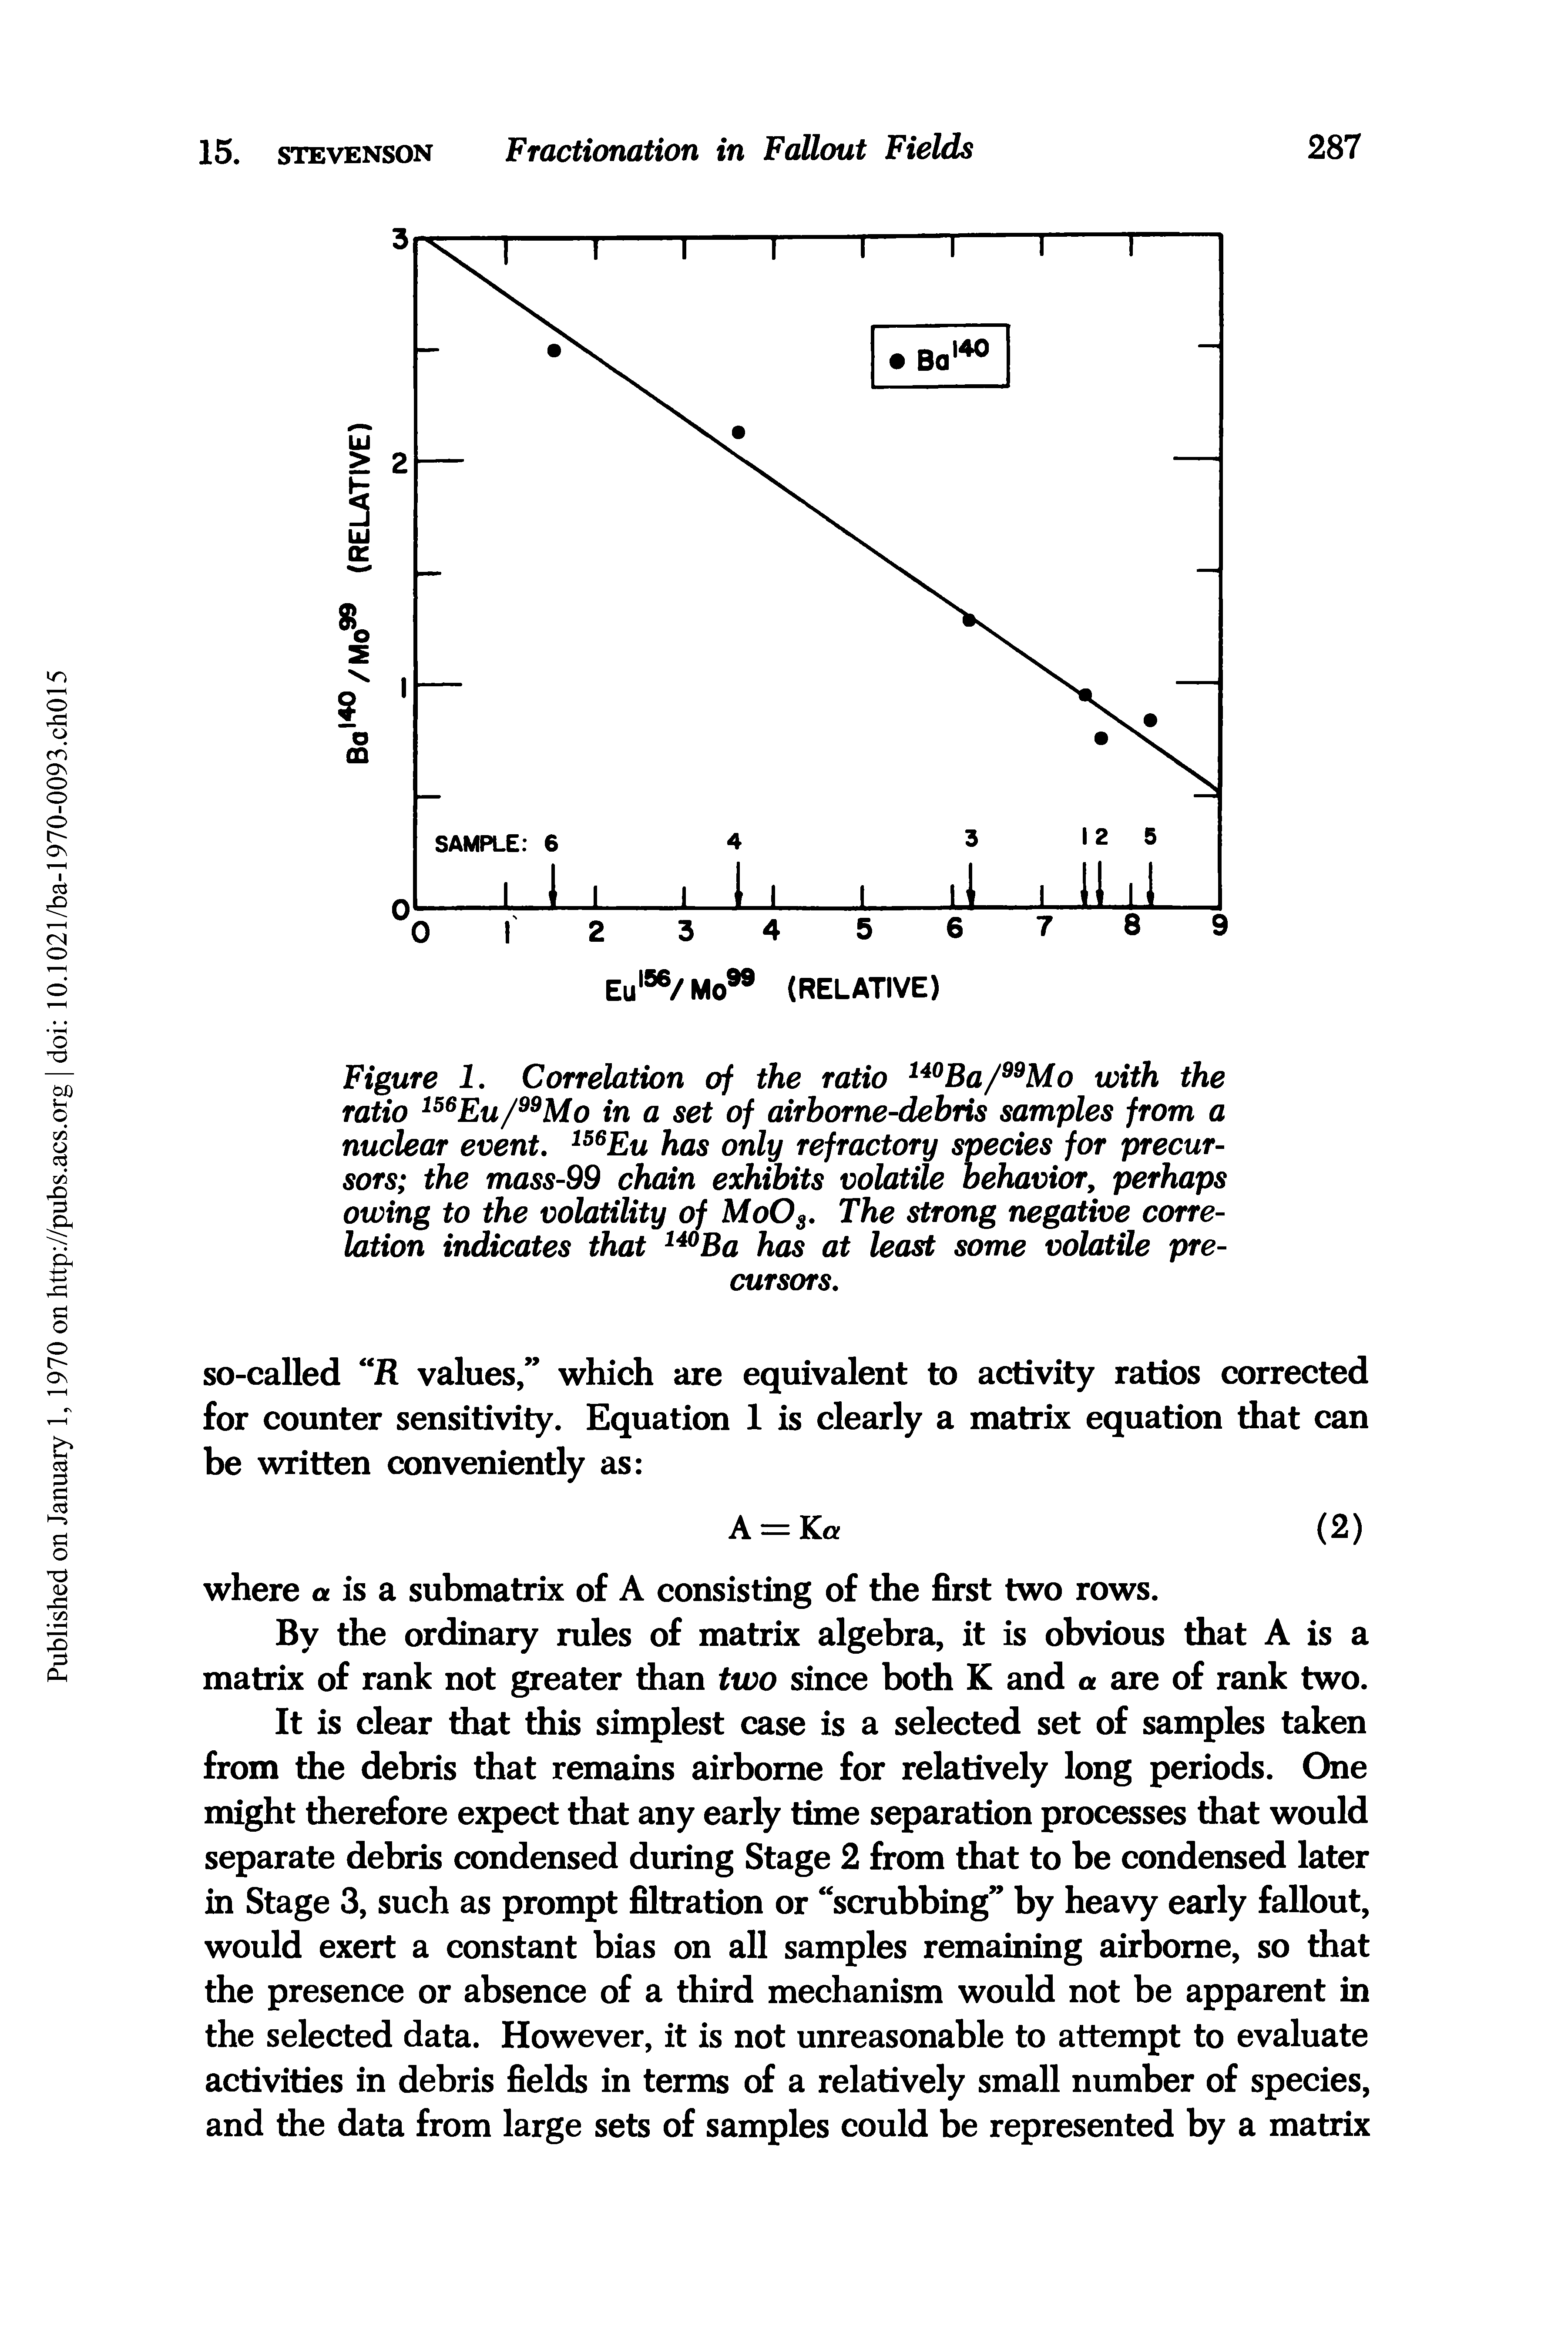 Figure 1. Correlation of the ratio 140Ba/"Mo with the ratio 156Eu/"Mo in a set of airborne-debris samples from a nuclear event. 156Eu has only refractory species for precursors the mass-99 chain exhibits volatile behavior, perhaps owing to the volatility of MoOs. The strong negative correlation indicates that 140Ba has at least some volatile precursors.